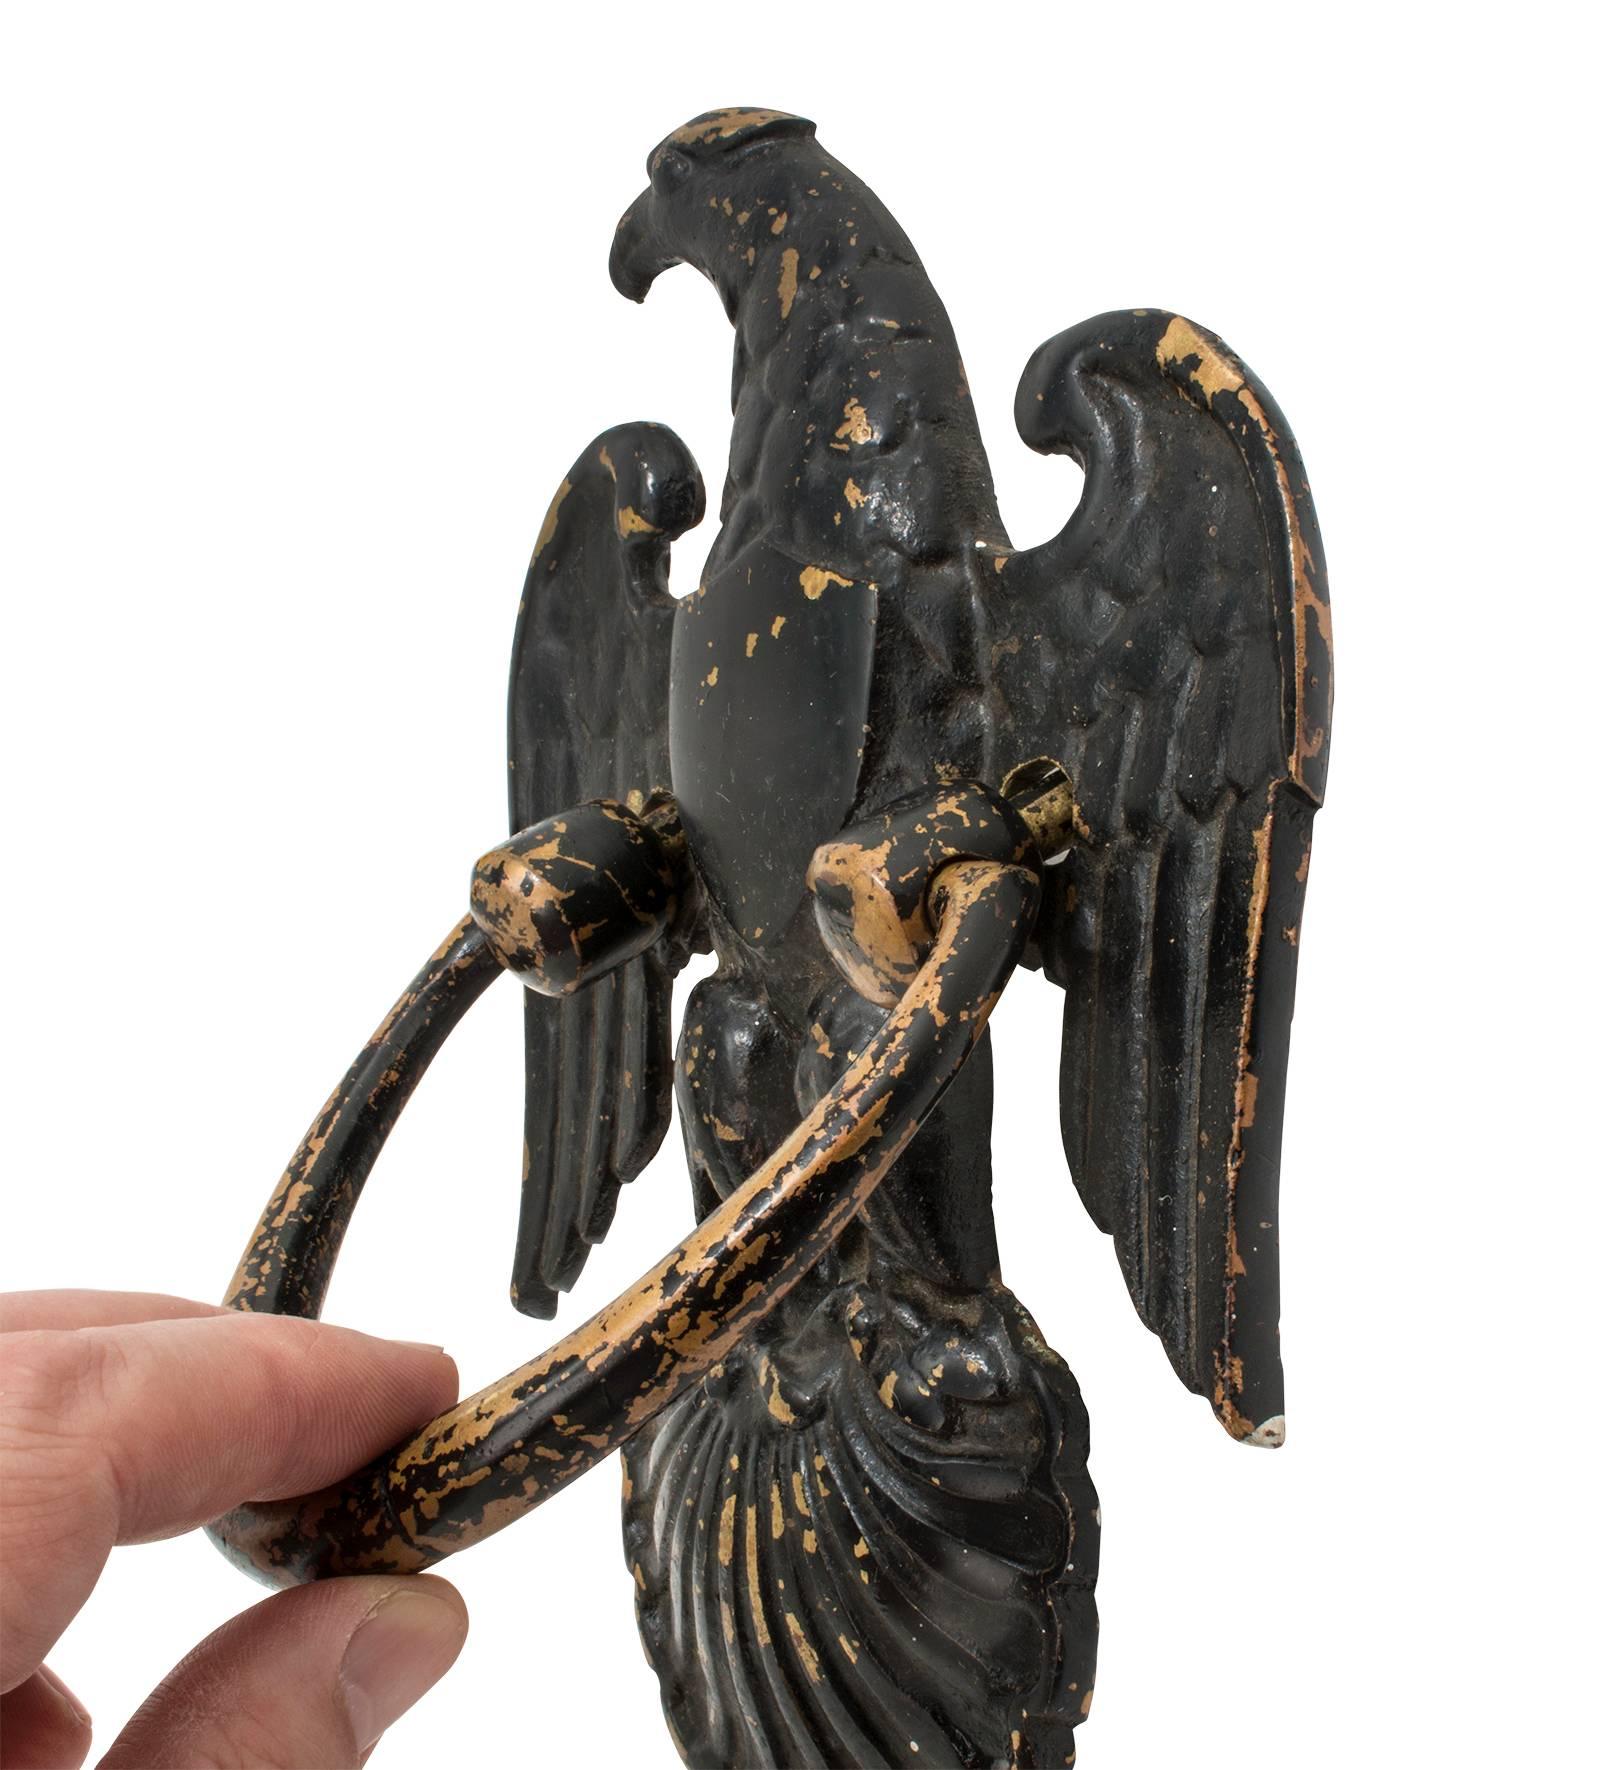 Aged nicely over the years, peeling black paint with under brass showing.
Handsome American Eagle door knocker. Adding charm to any doors.